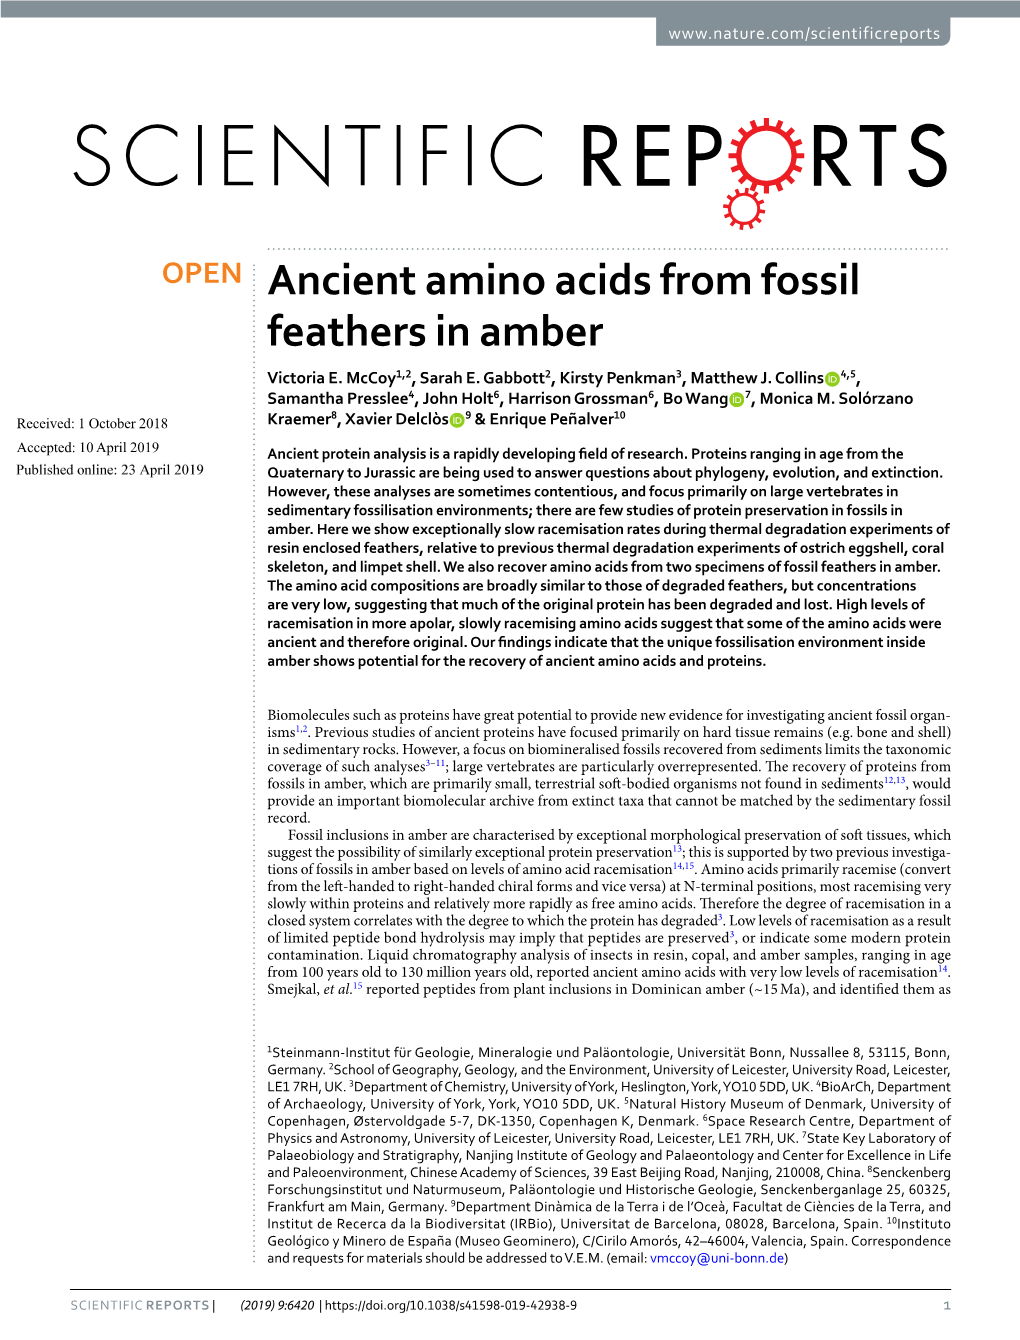 Ancient Amino Acids from Fossil Feathers in Amber Victoria E